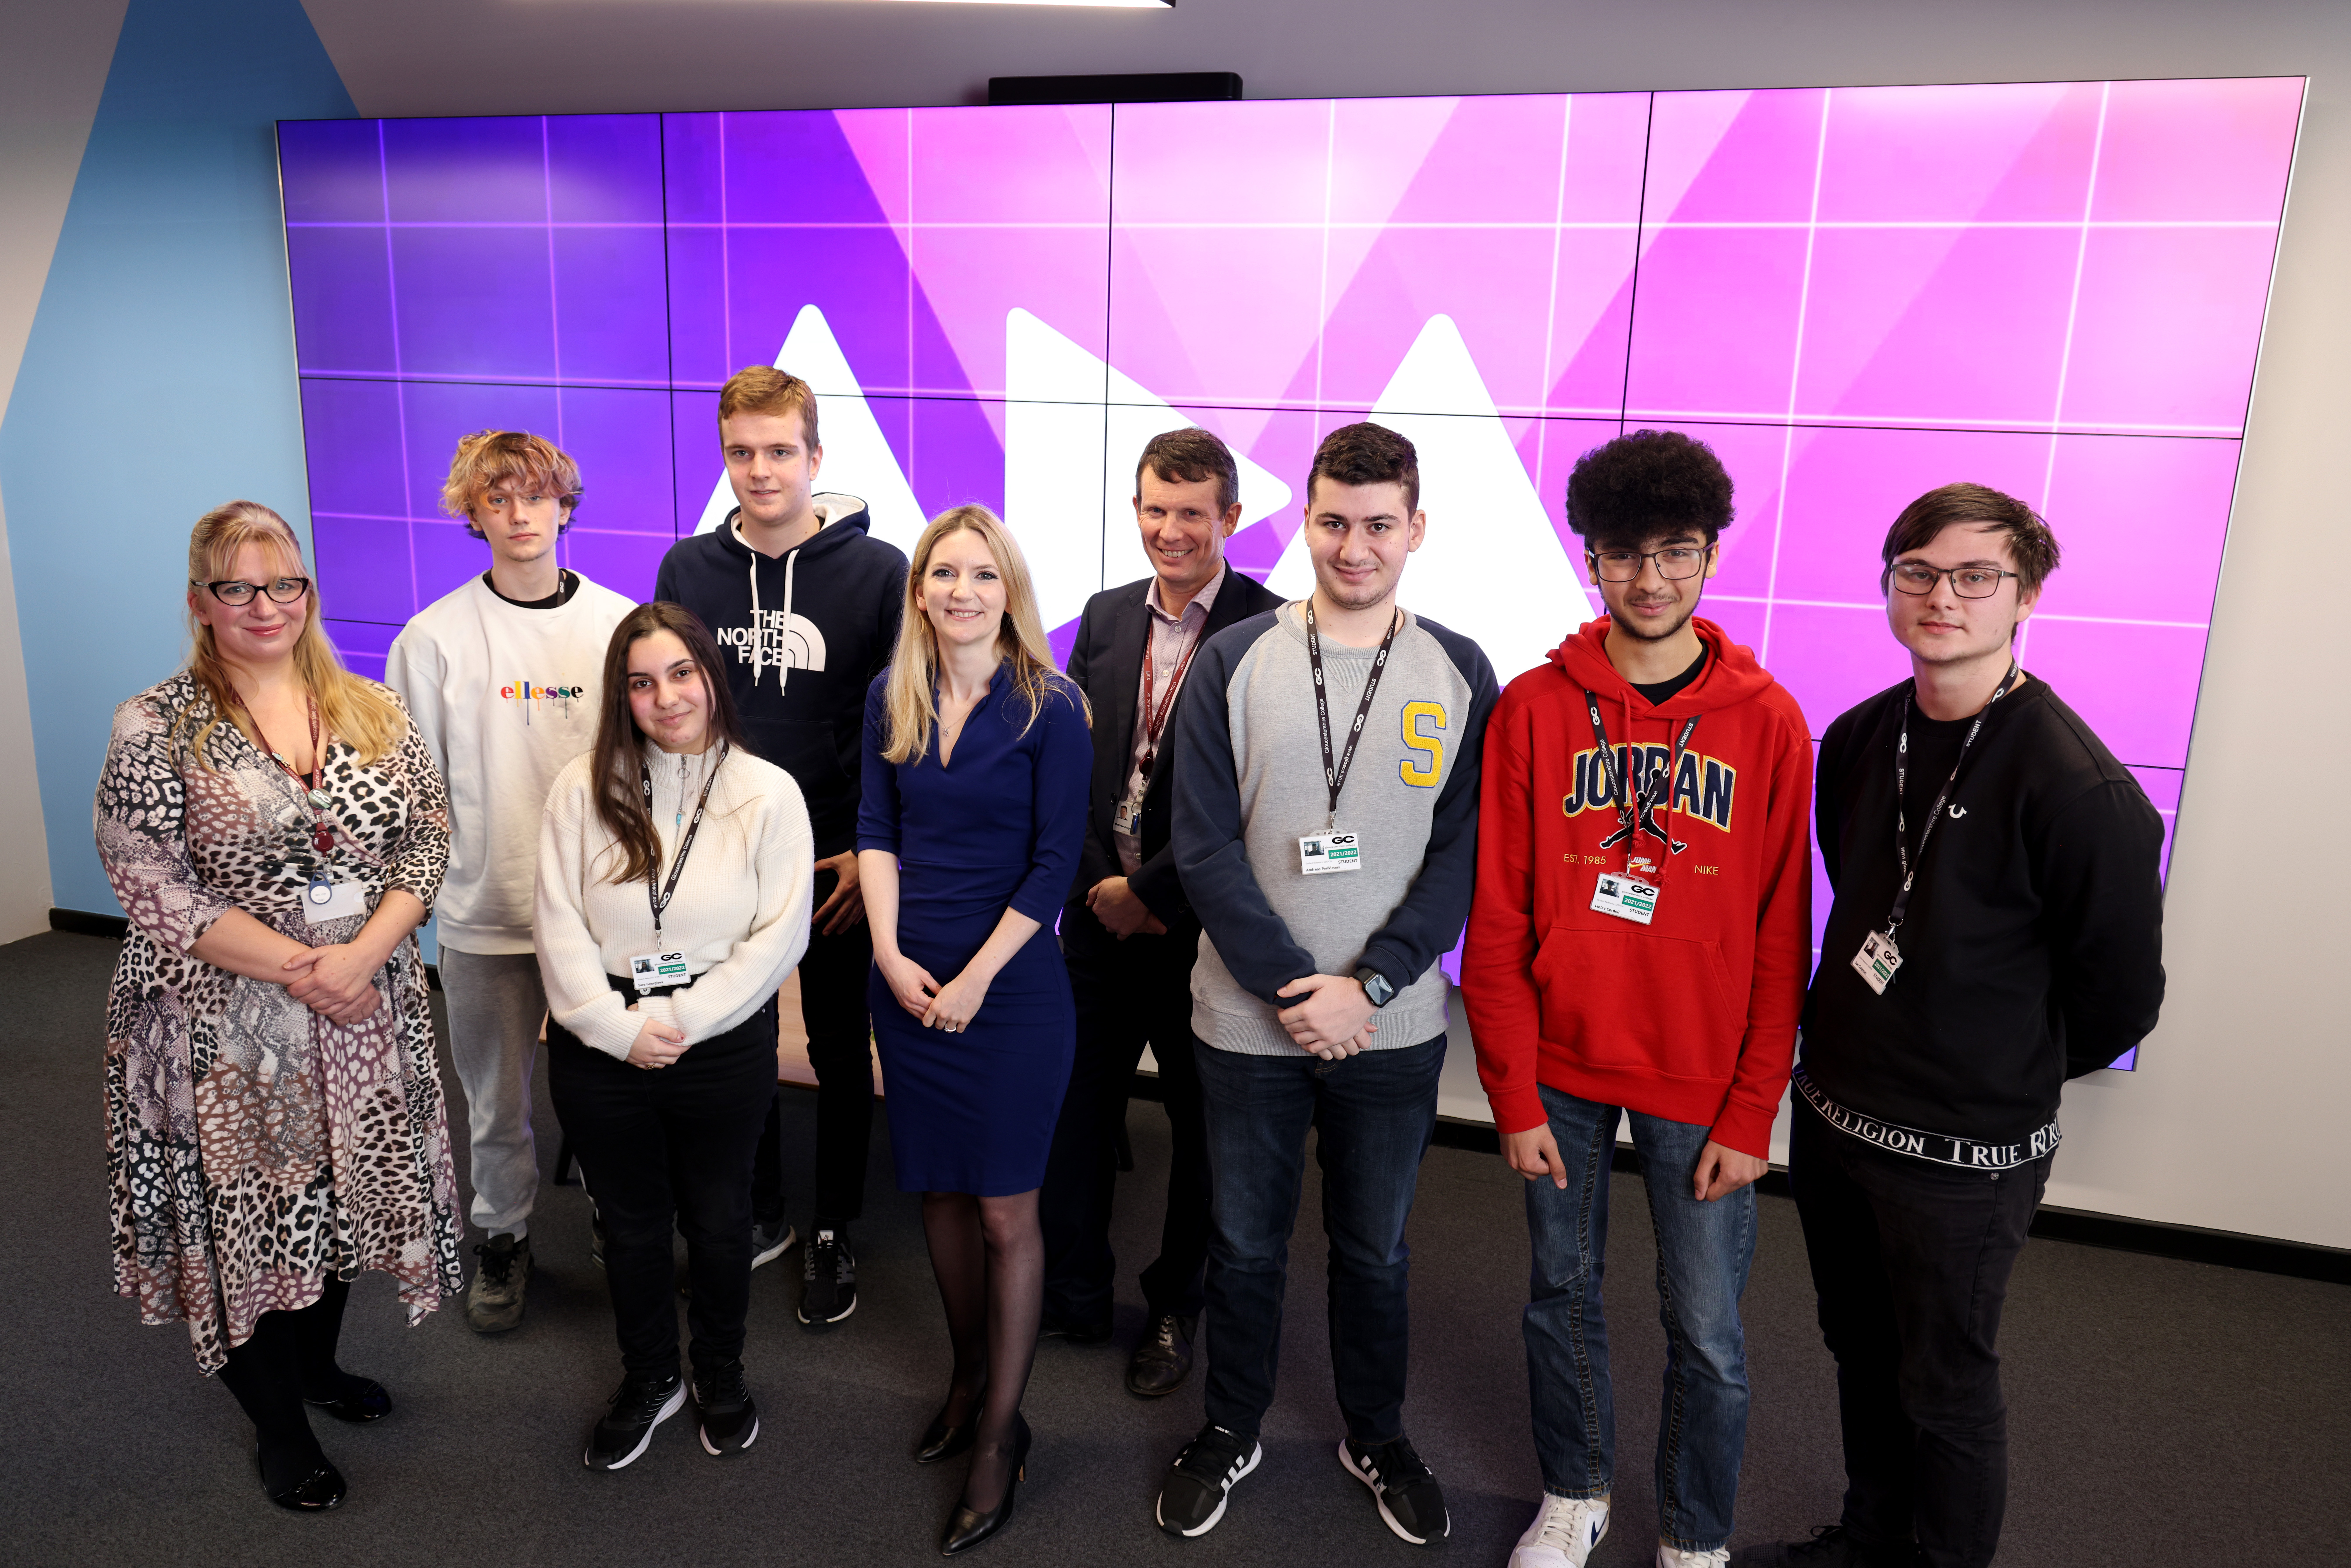 Minister Julia Lopez meets the ‘cyber talent of tomorrow’ at ADA